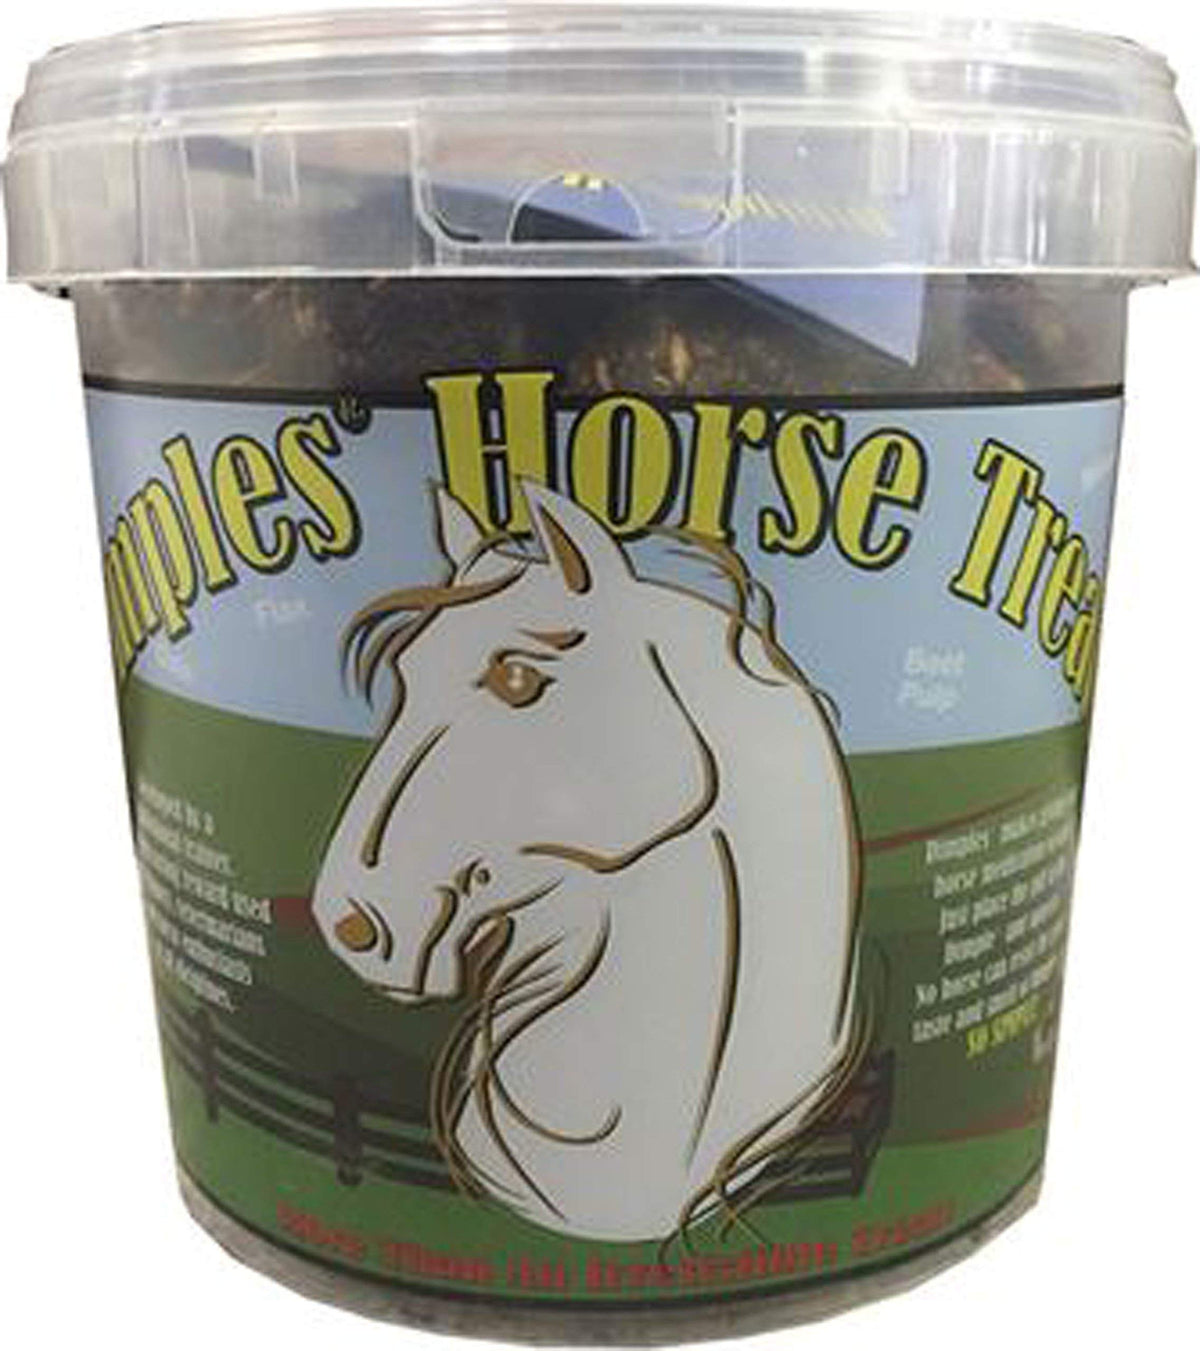 Dimples Horse Treats with Dimples Pocket 3 LB 2-Pack